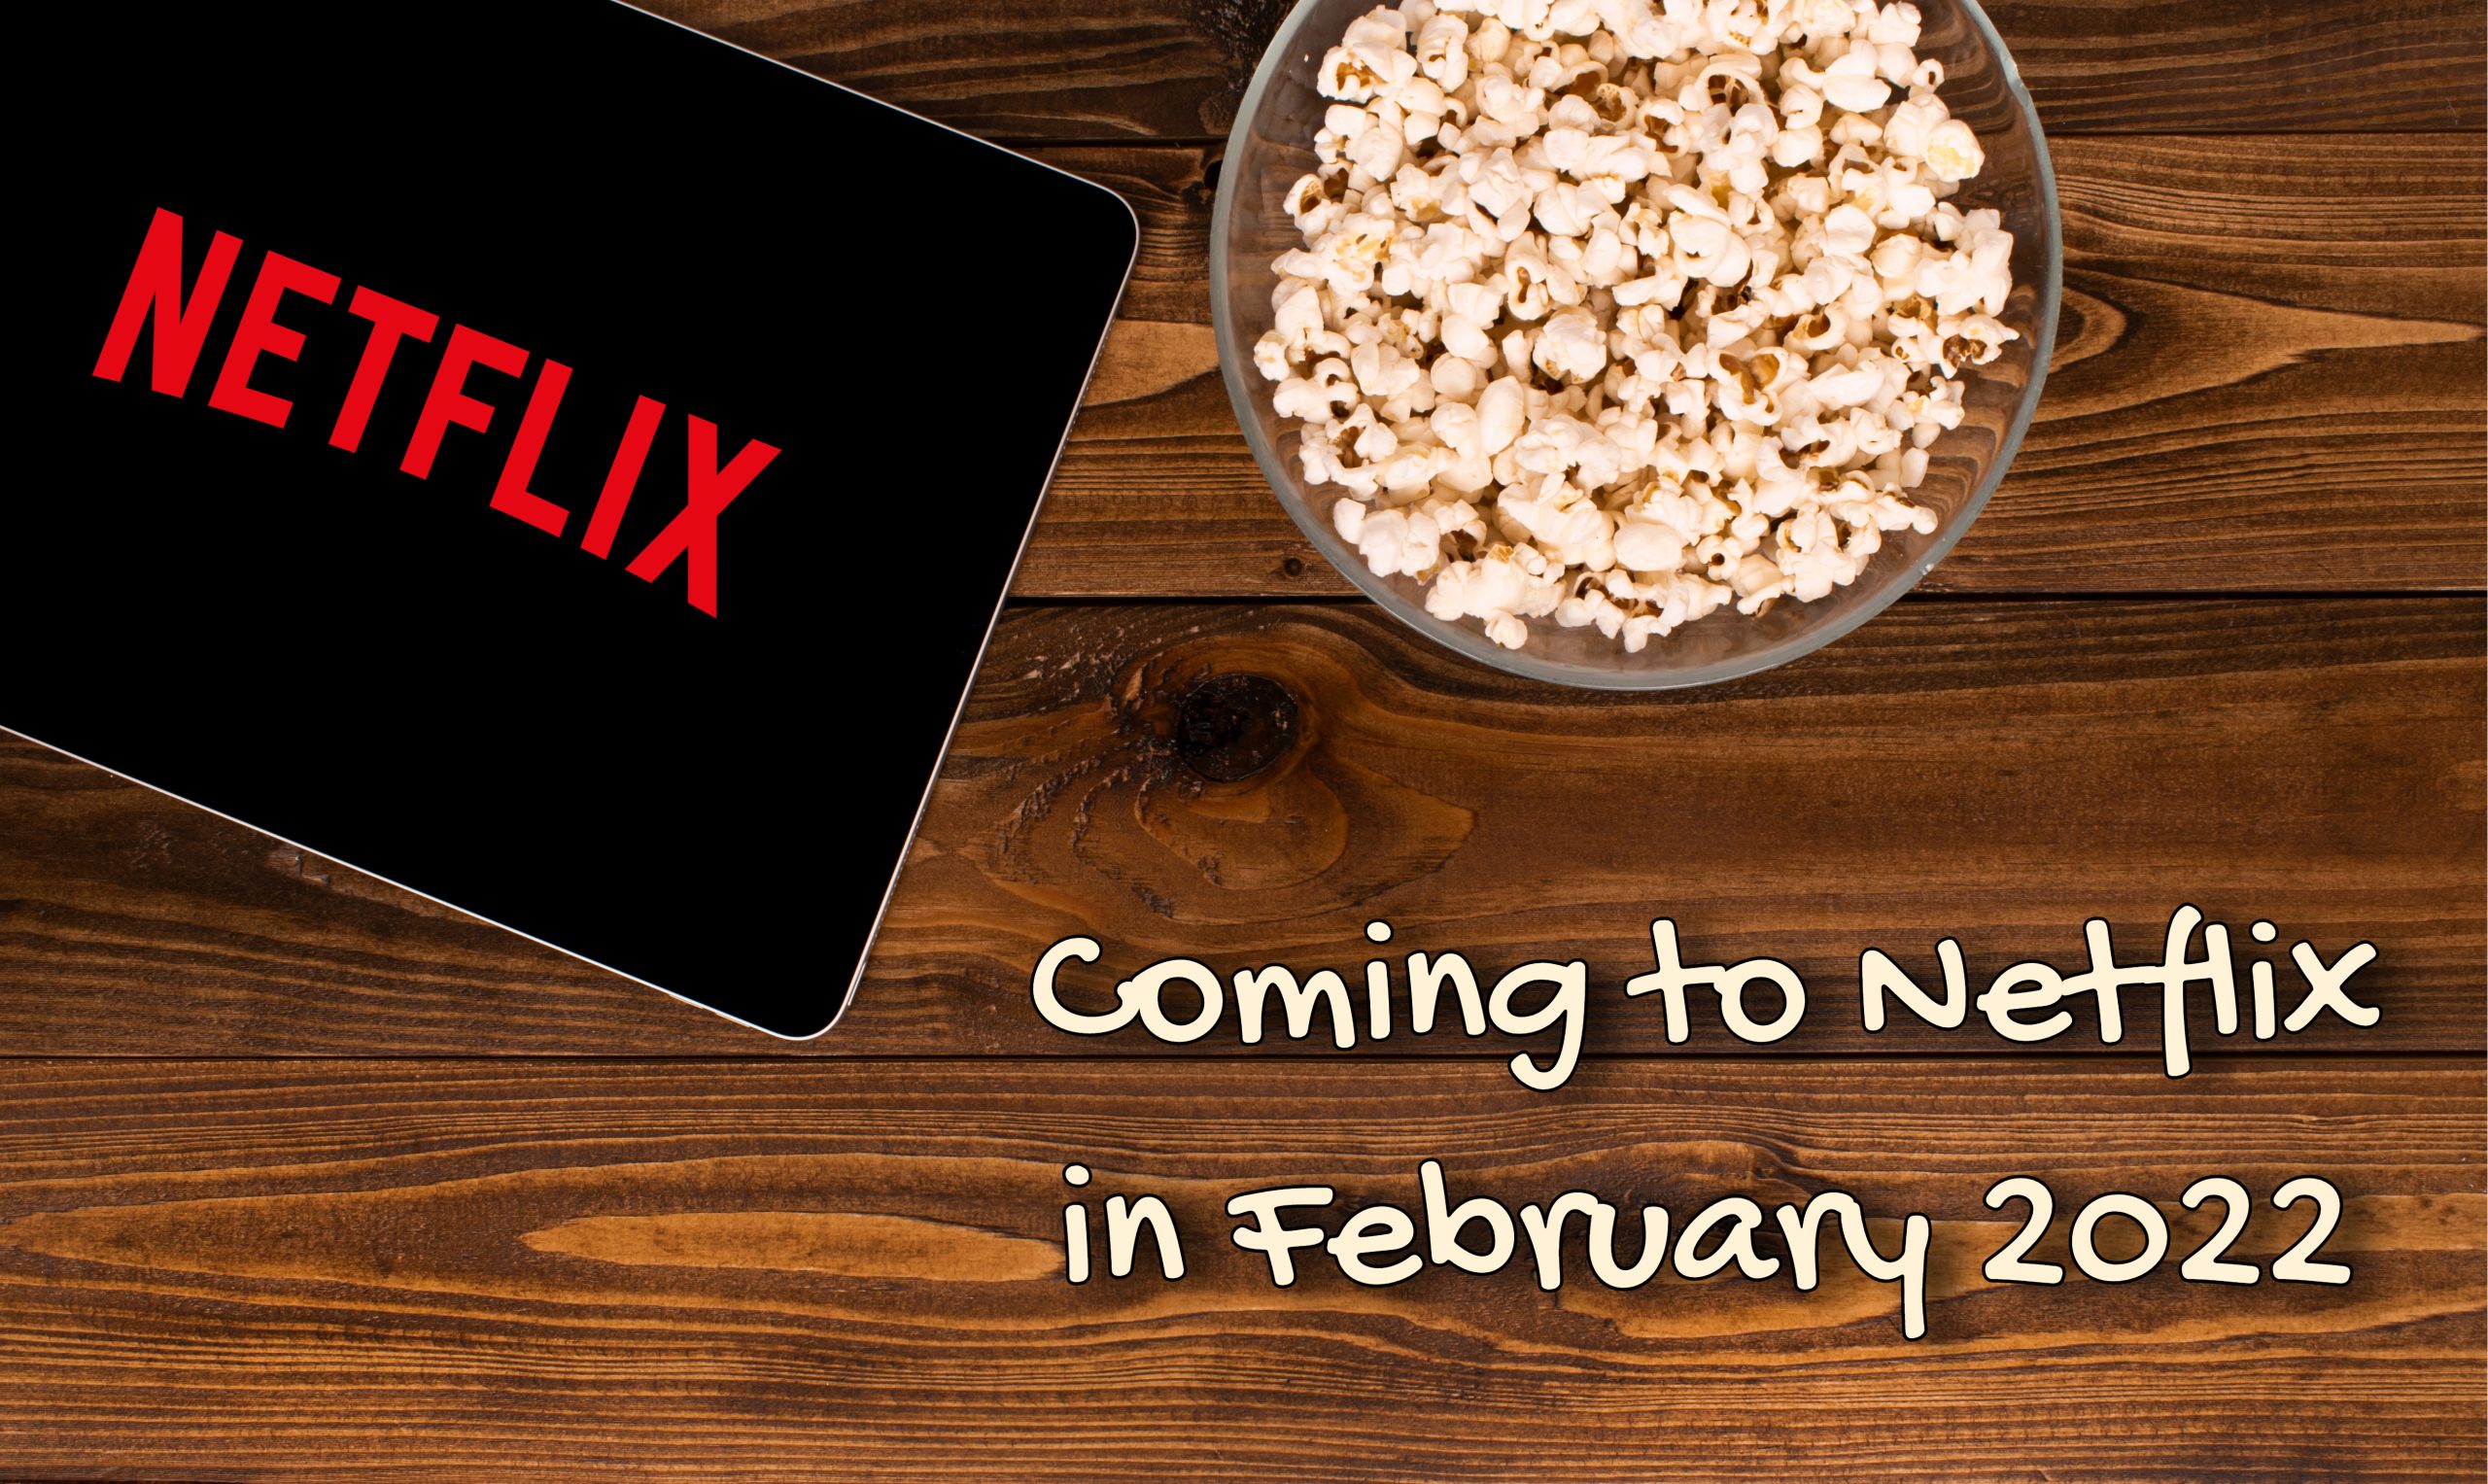 Coming to Netflix in February 2022